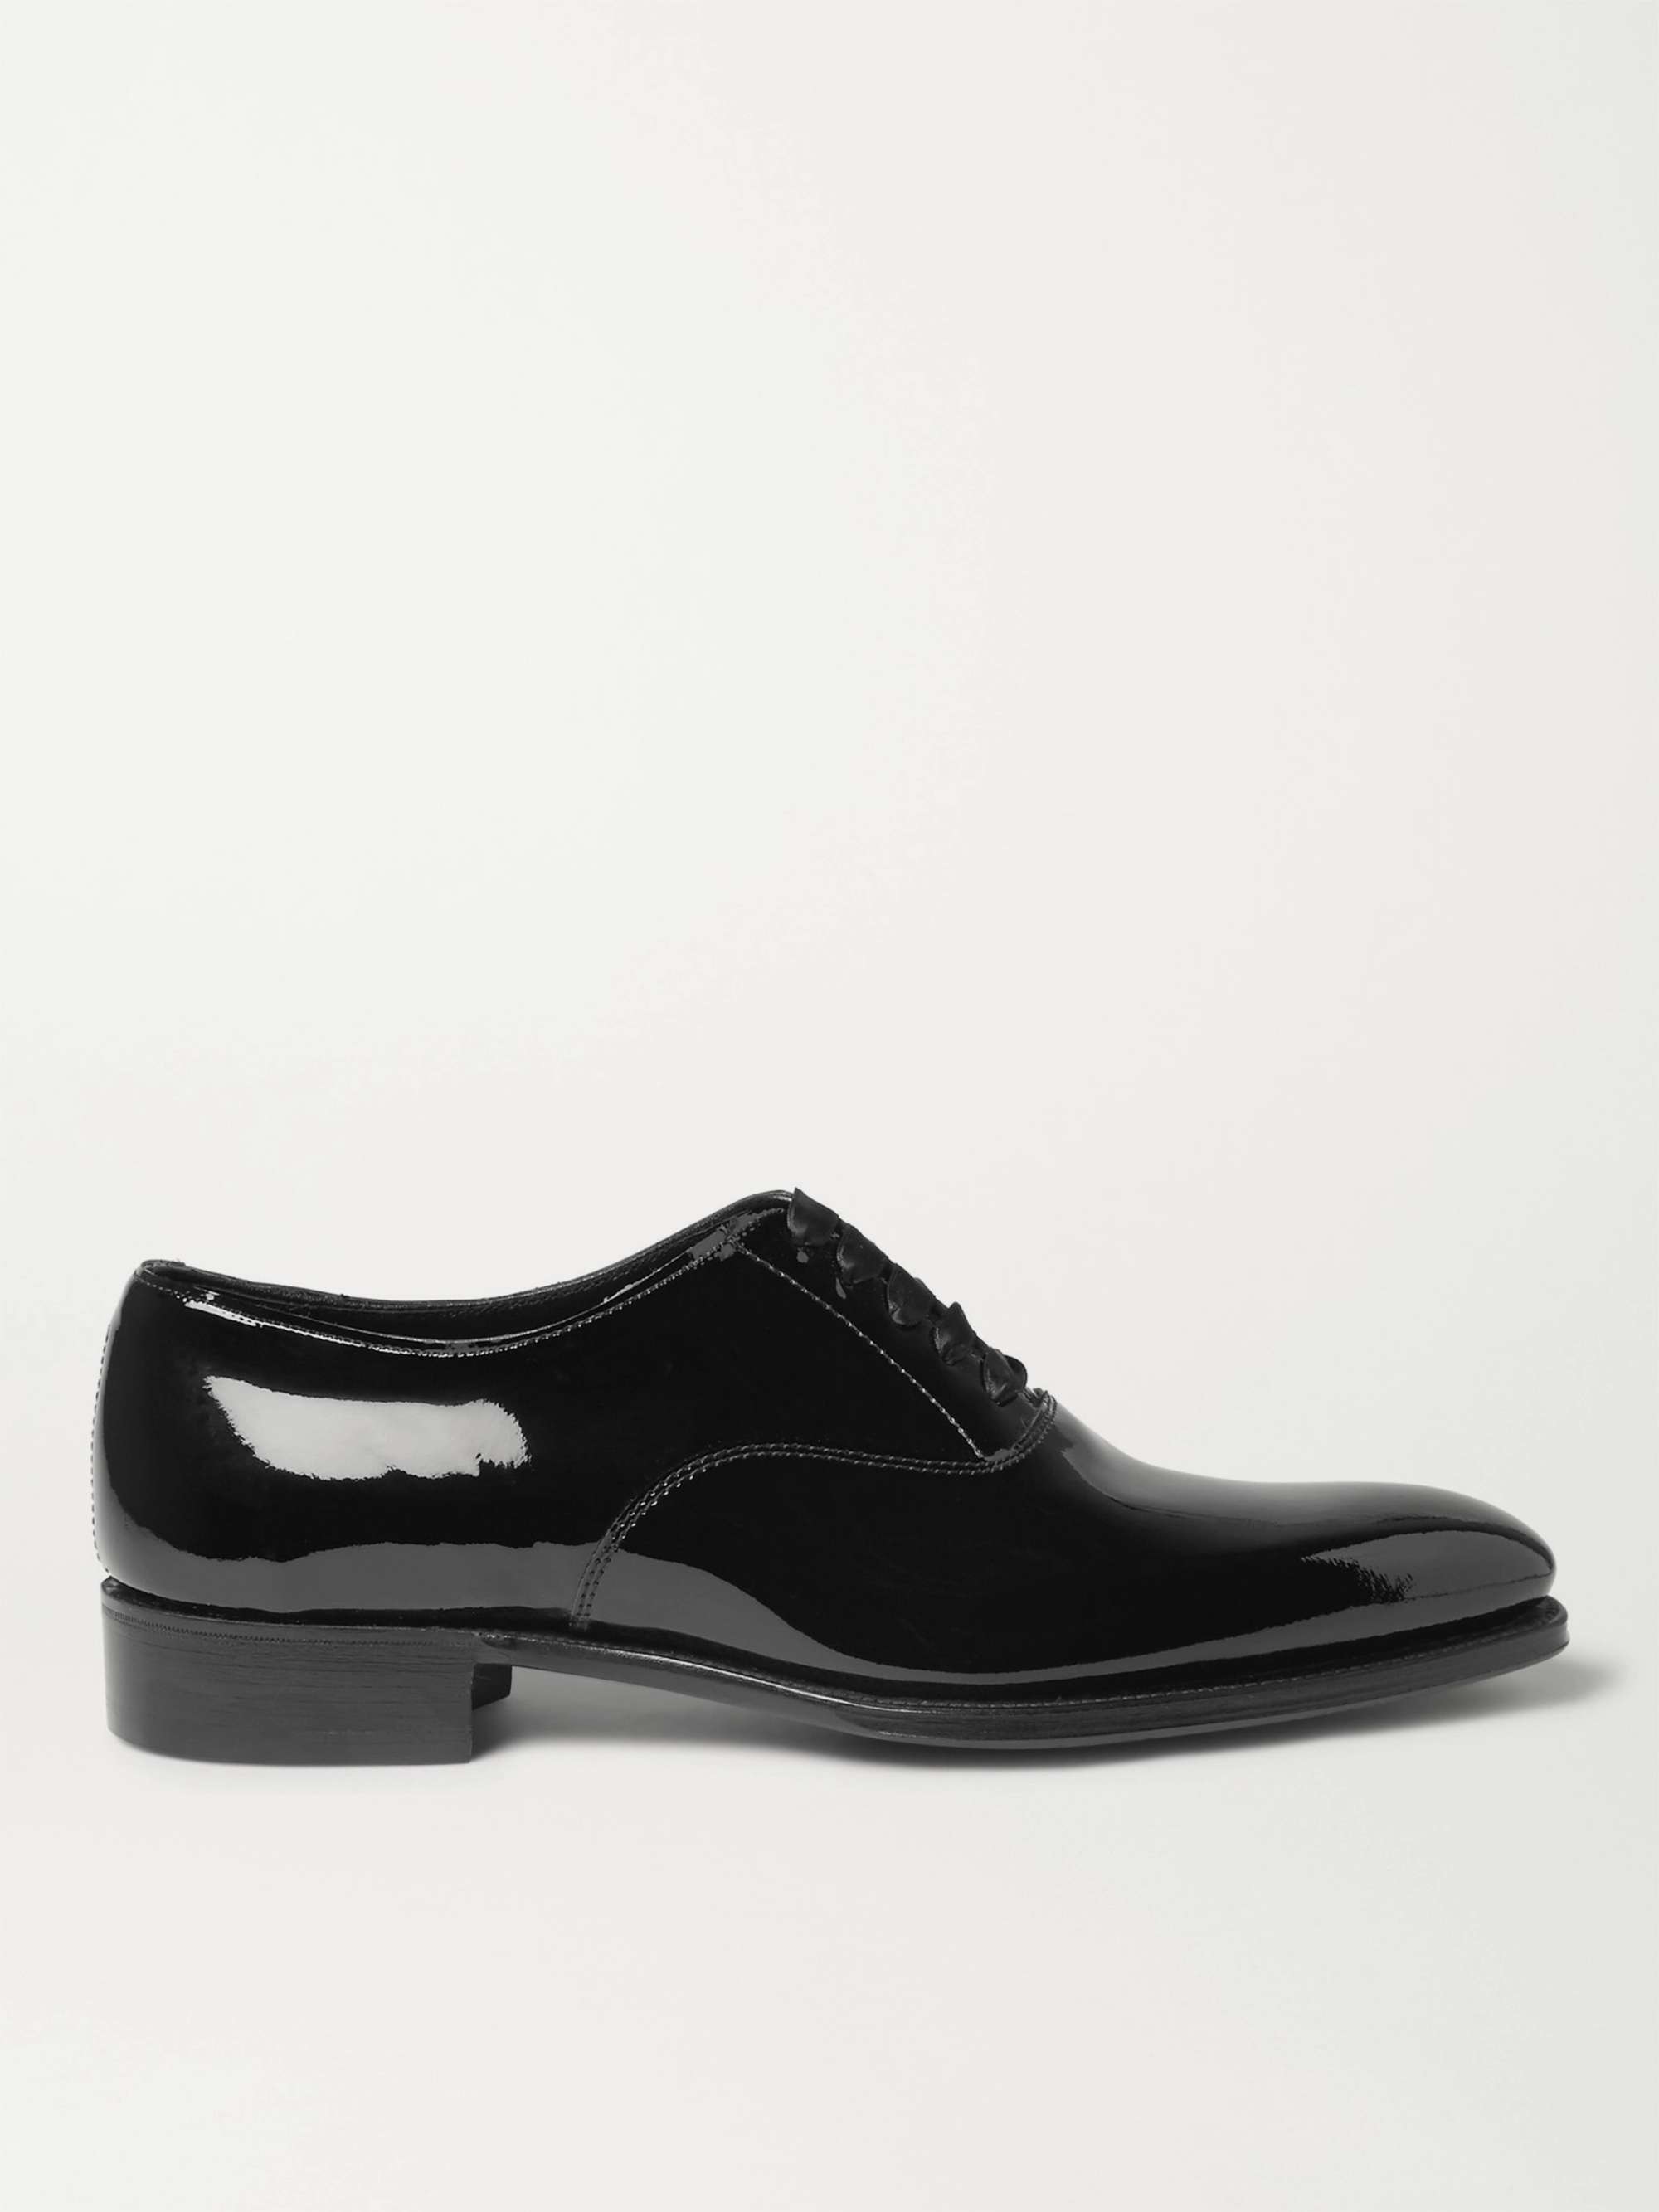 KINGSMAN + George Cleverley Patent-Leather Oxford Shoes